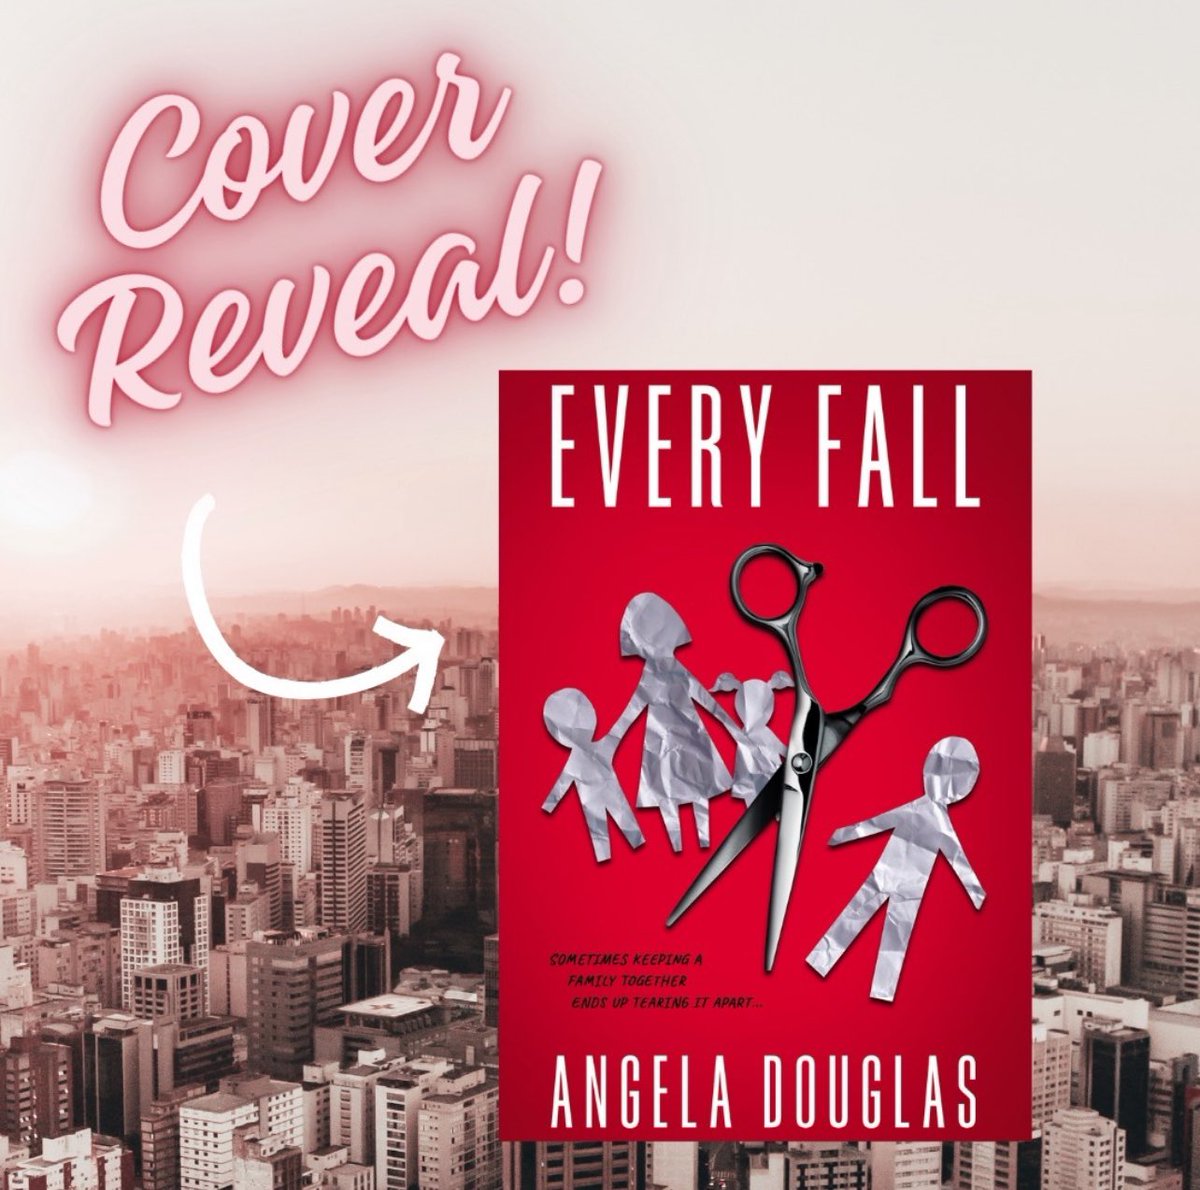 Be prepared to be kept on the edge of your seat by this genre-blending thriller, coming out January 2025! More info: Angeladouglasbooks.com #EveryFall #CanadianThriller #CanadianFiction #CoverReveal #CanLit #Thriller #Upcomingthriller #booksbooksbooks #book @RAPubCollective